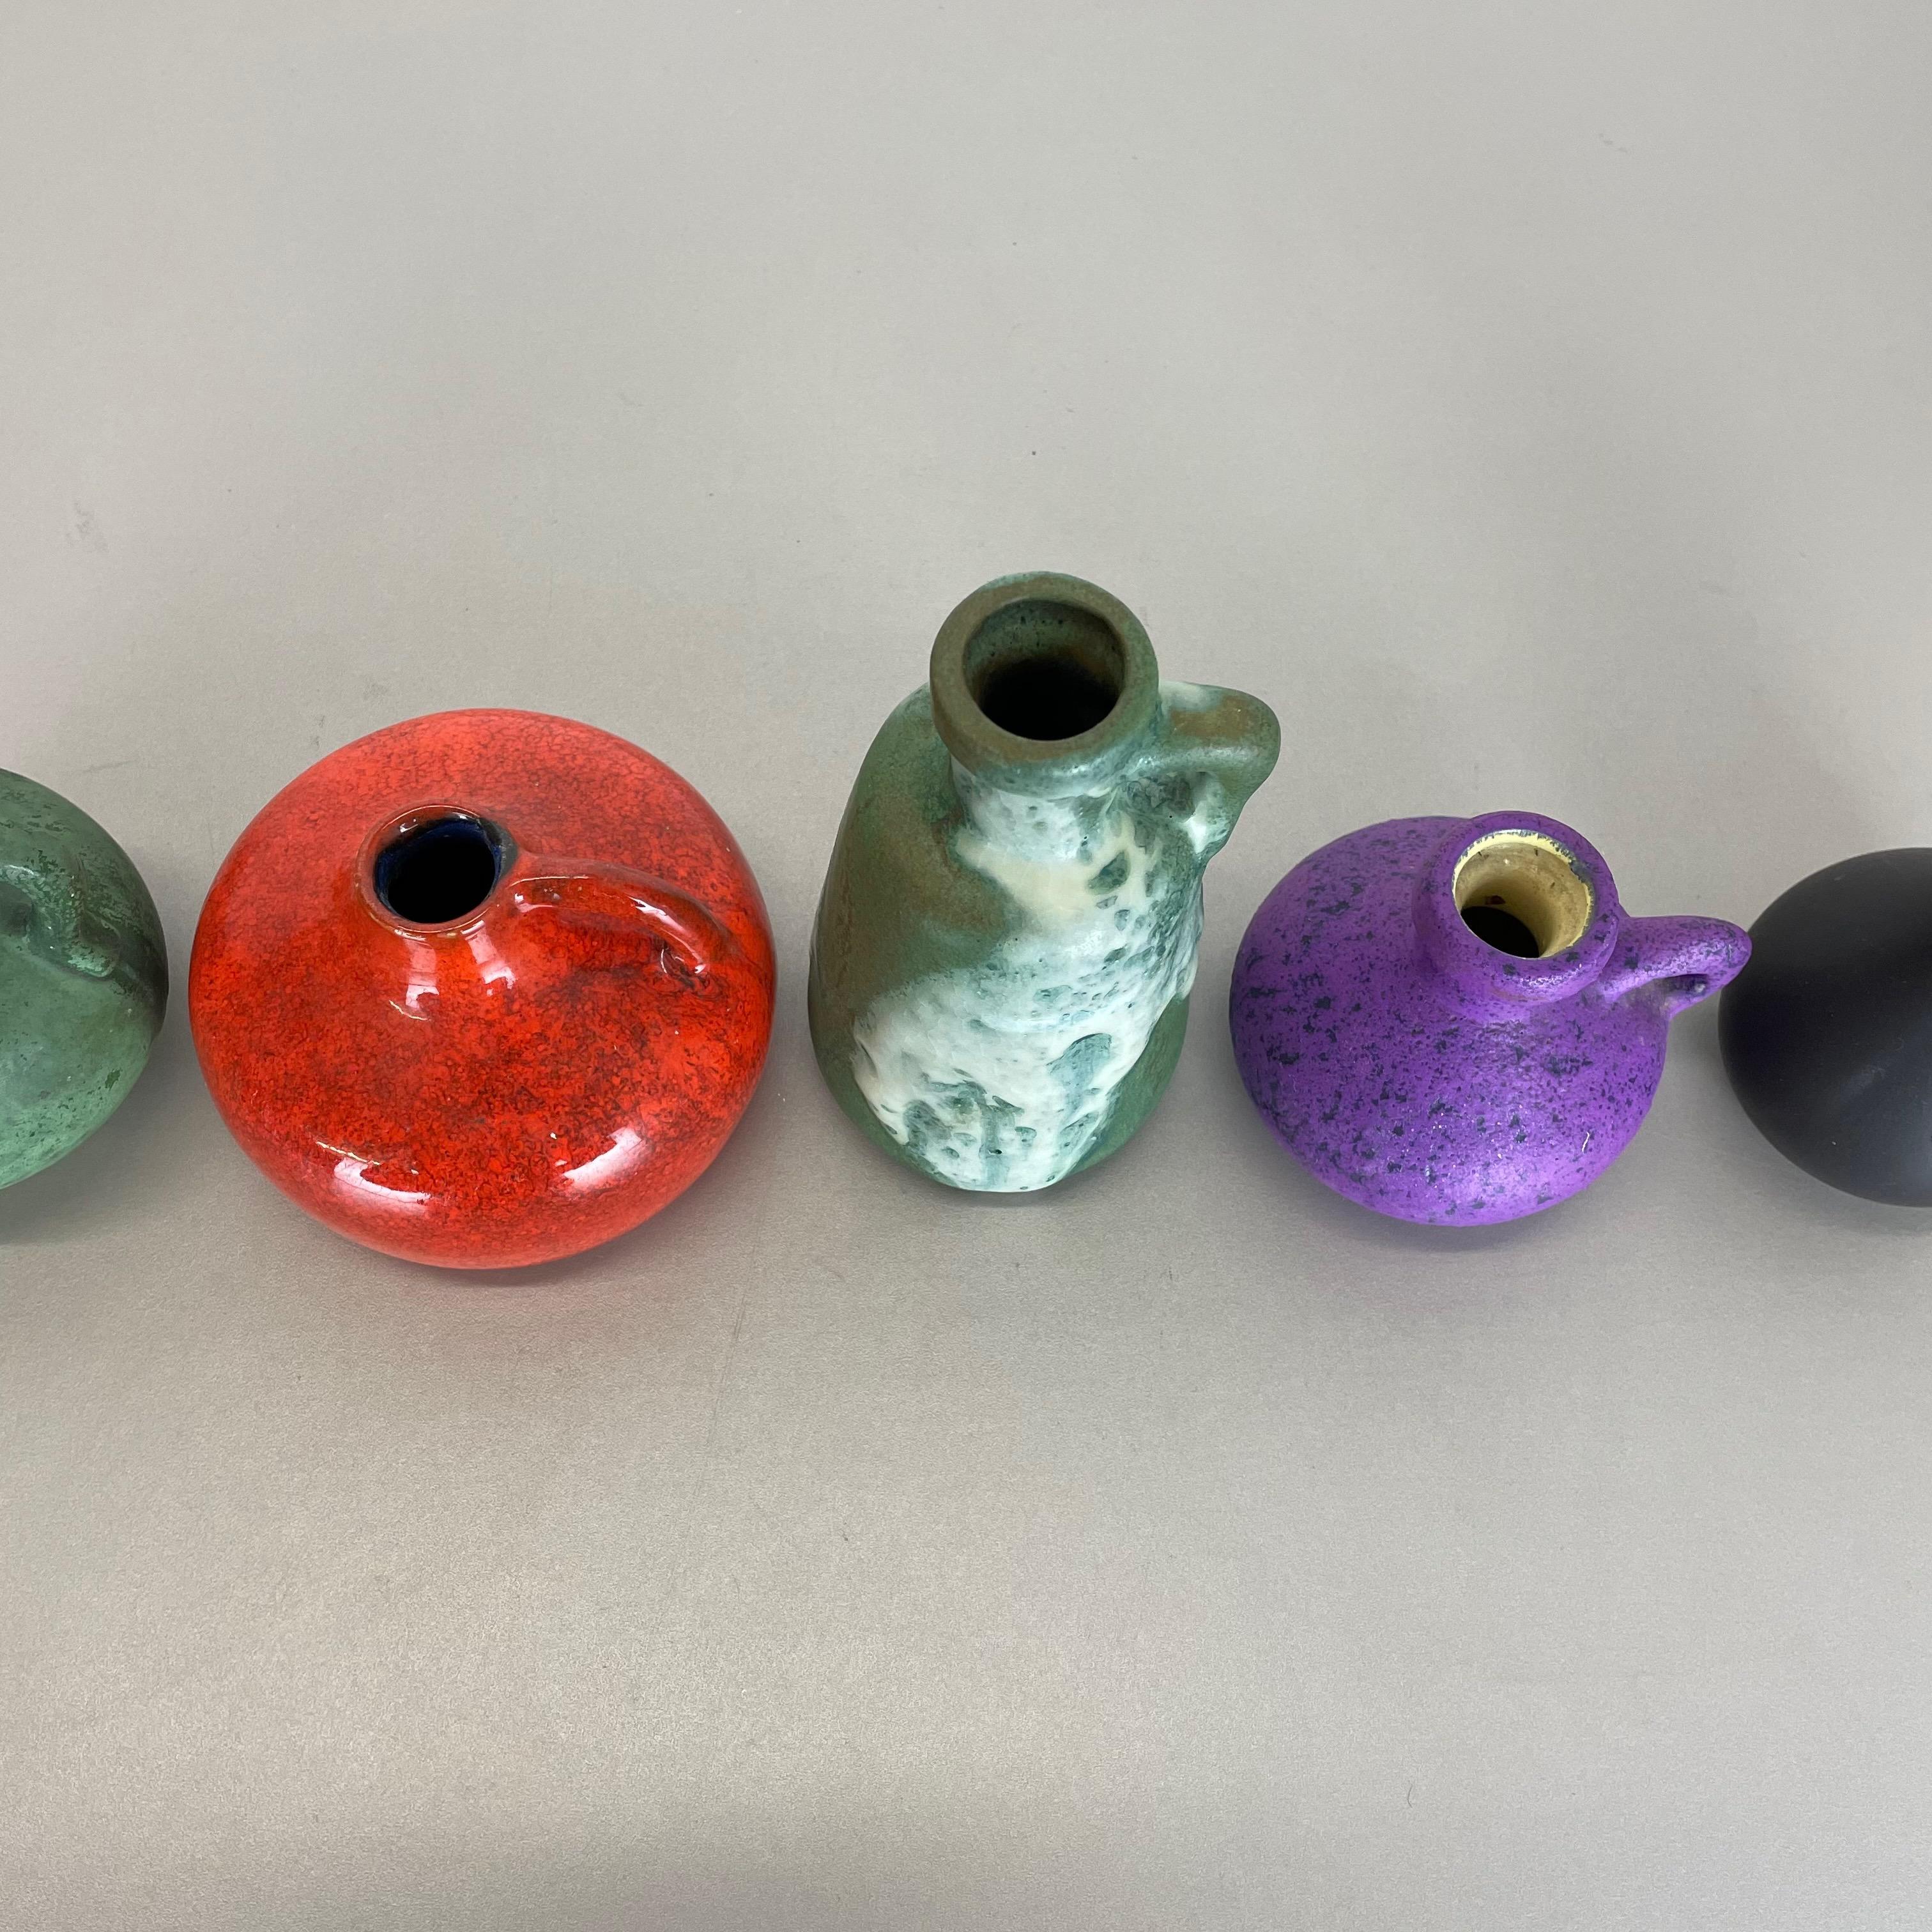 Set of 5 Multicolor Ceramic Pottery Vase Objects by Otto Keramik, Germany, 1970s For Sale 10